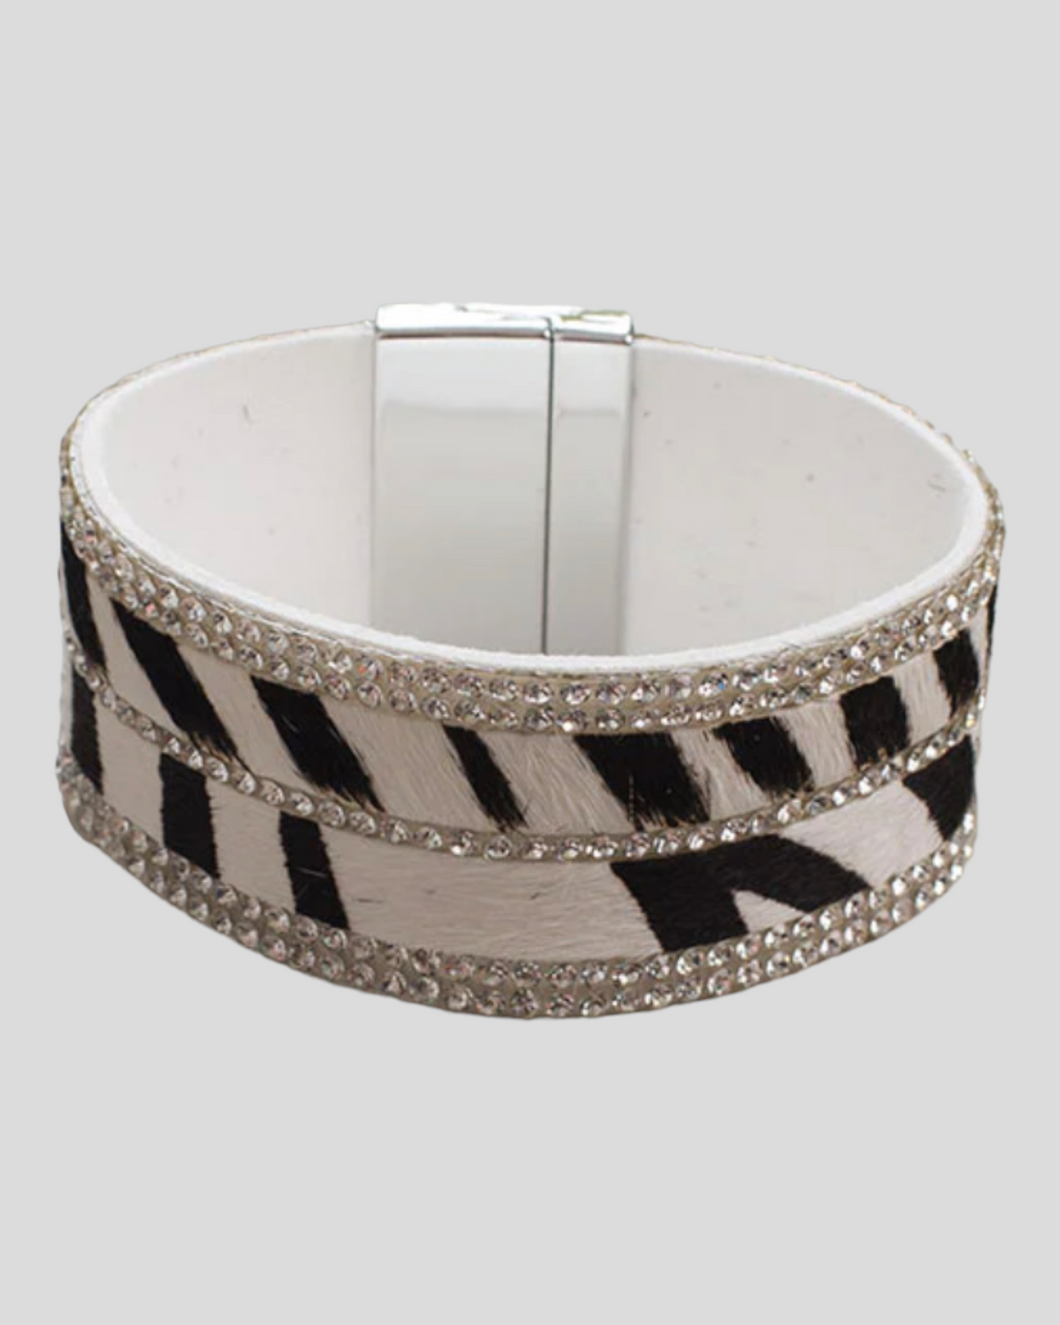 WHERE THE WILD THINGS ARE LEATHER FUR BRACELET, ZEBRA